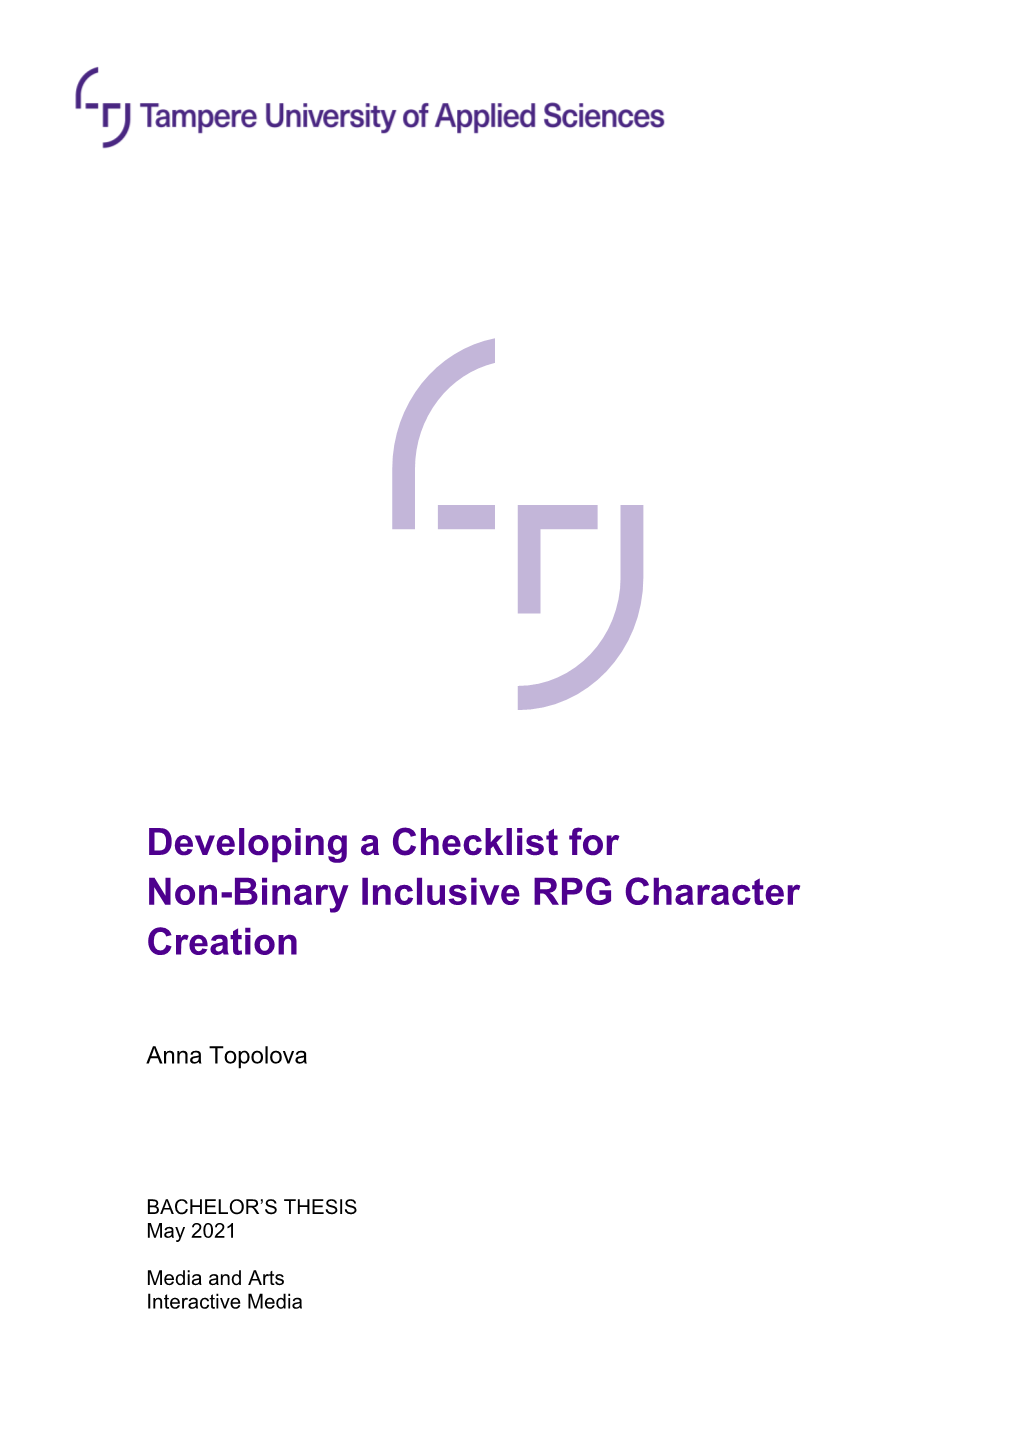 Developing a Checklist for Non-Binary Inclusive RPG Character Creation